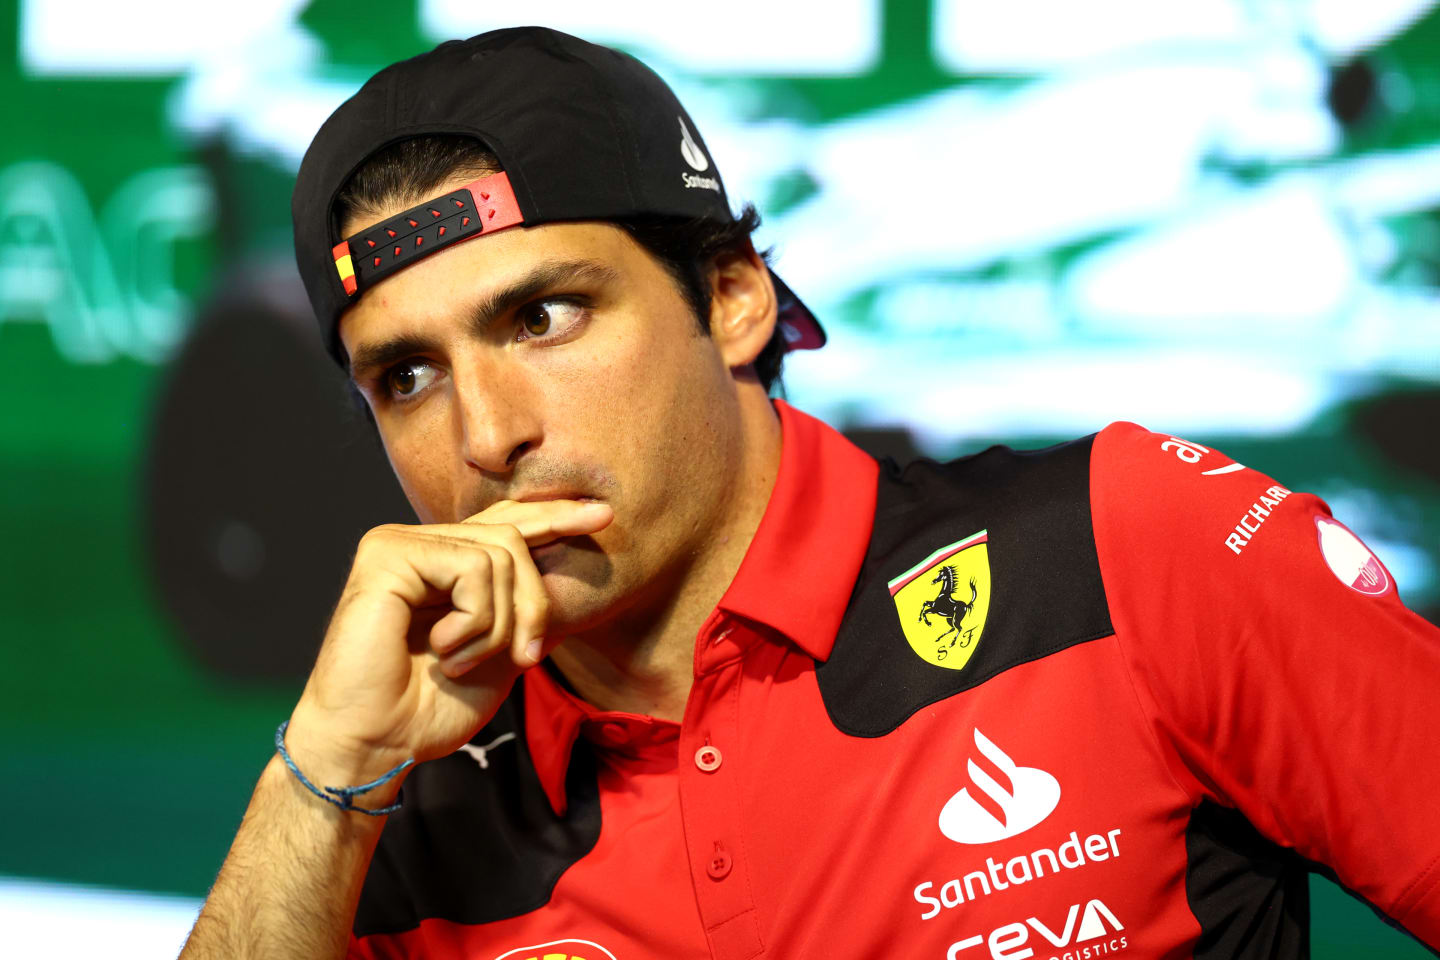 JEDDAH, SAUDI ARABIA - MARCH 16: Carlos Sainz of Spain and Ferrari attends the Drivers Press Conference during previews ahead of the F1 Grand Prix of Saudi Arabia at Jeddah Corniche Circuit on March 16, 2023 in Jeddah, Saudi Arabia. (Photo by Bryn Lennon/Getty Images)